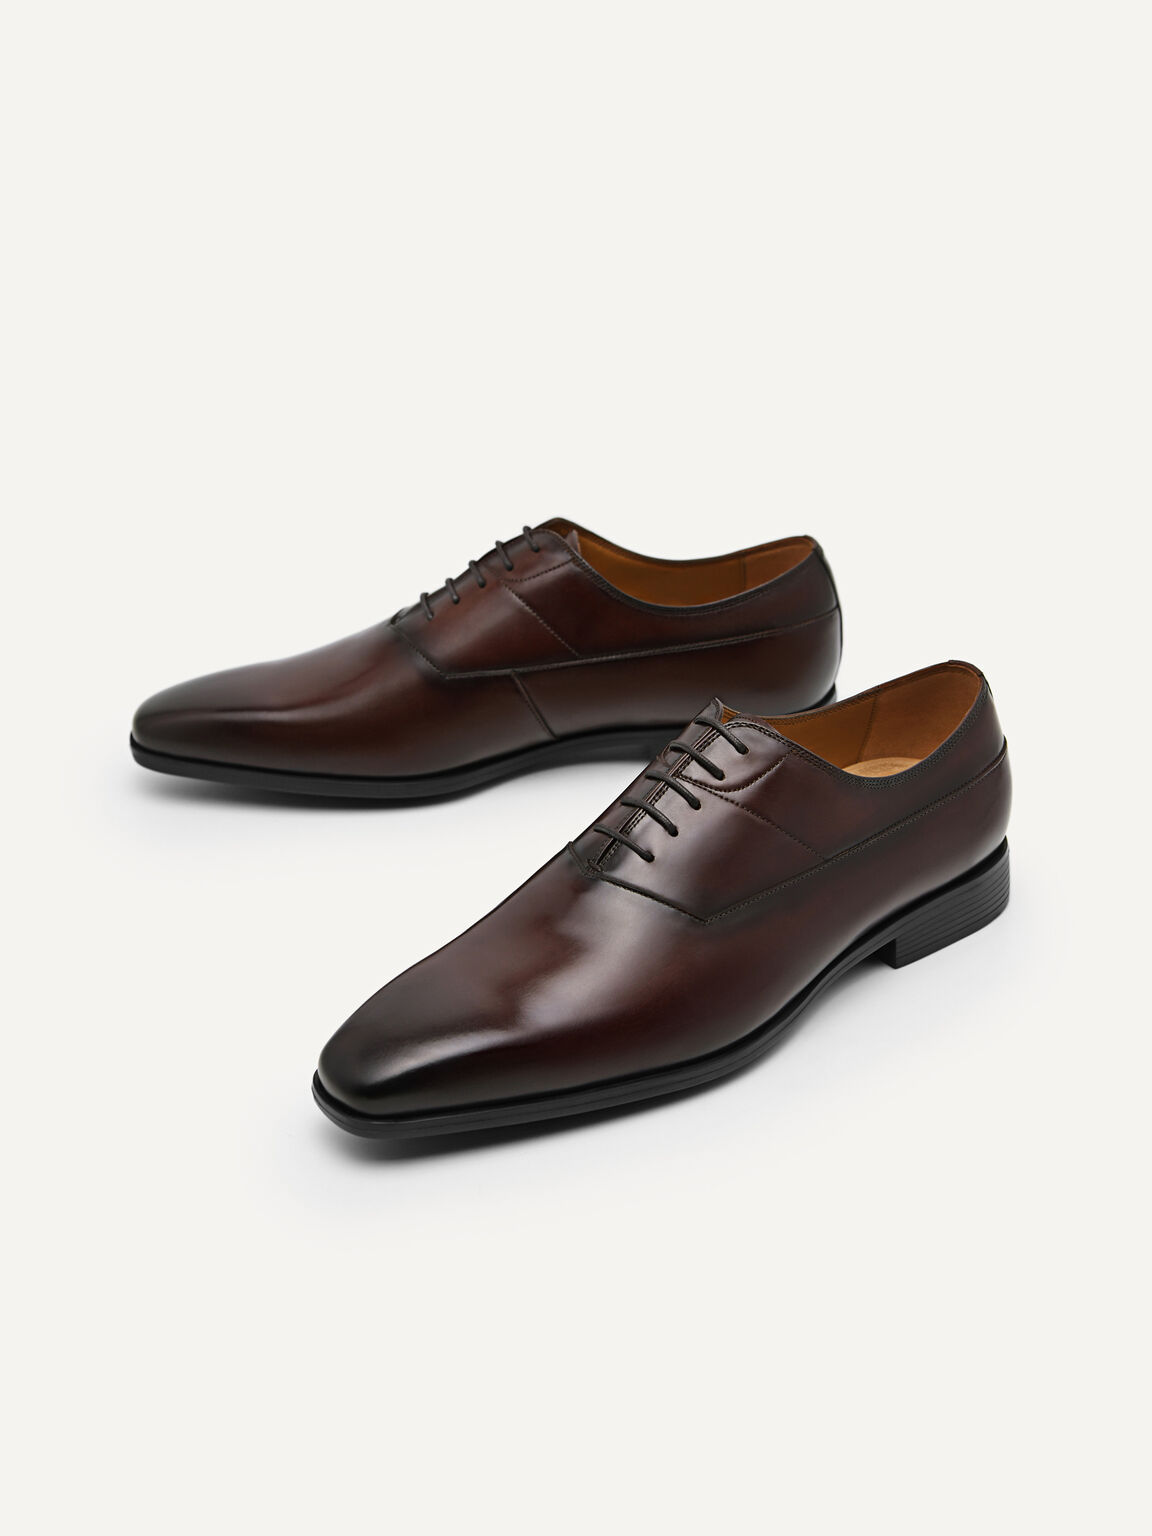 Altitude Lightweight Leather Oxfords, Brown